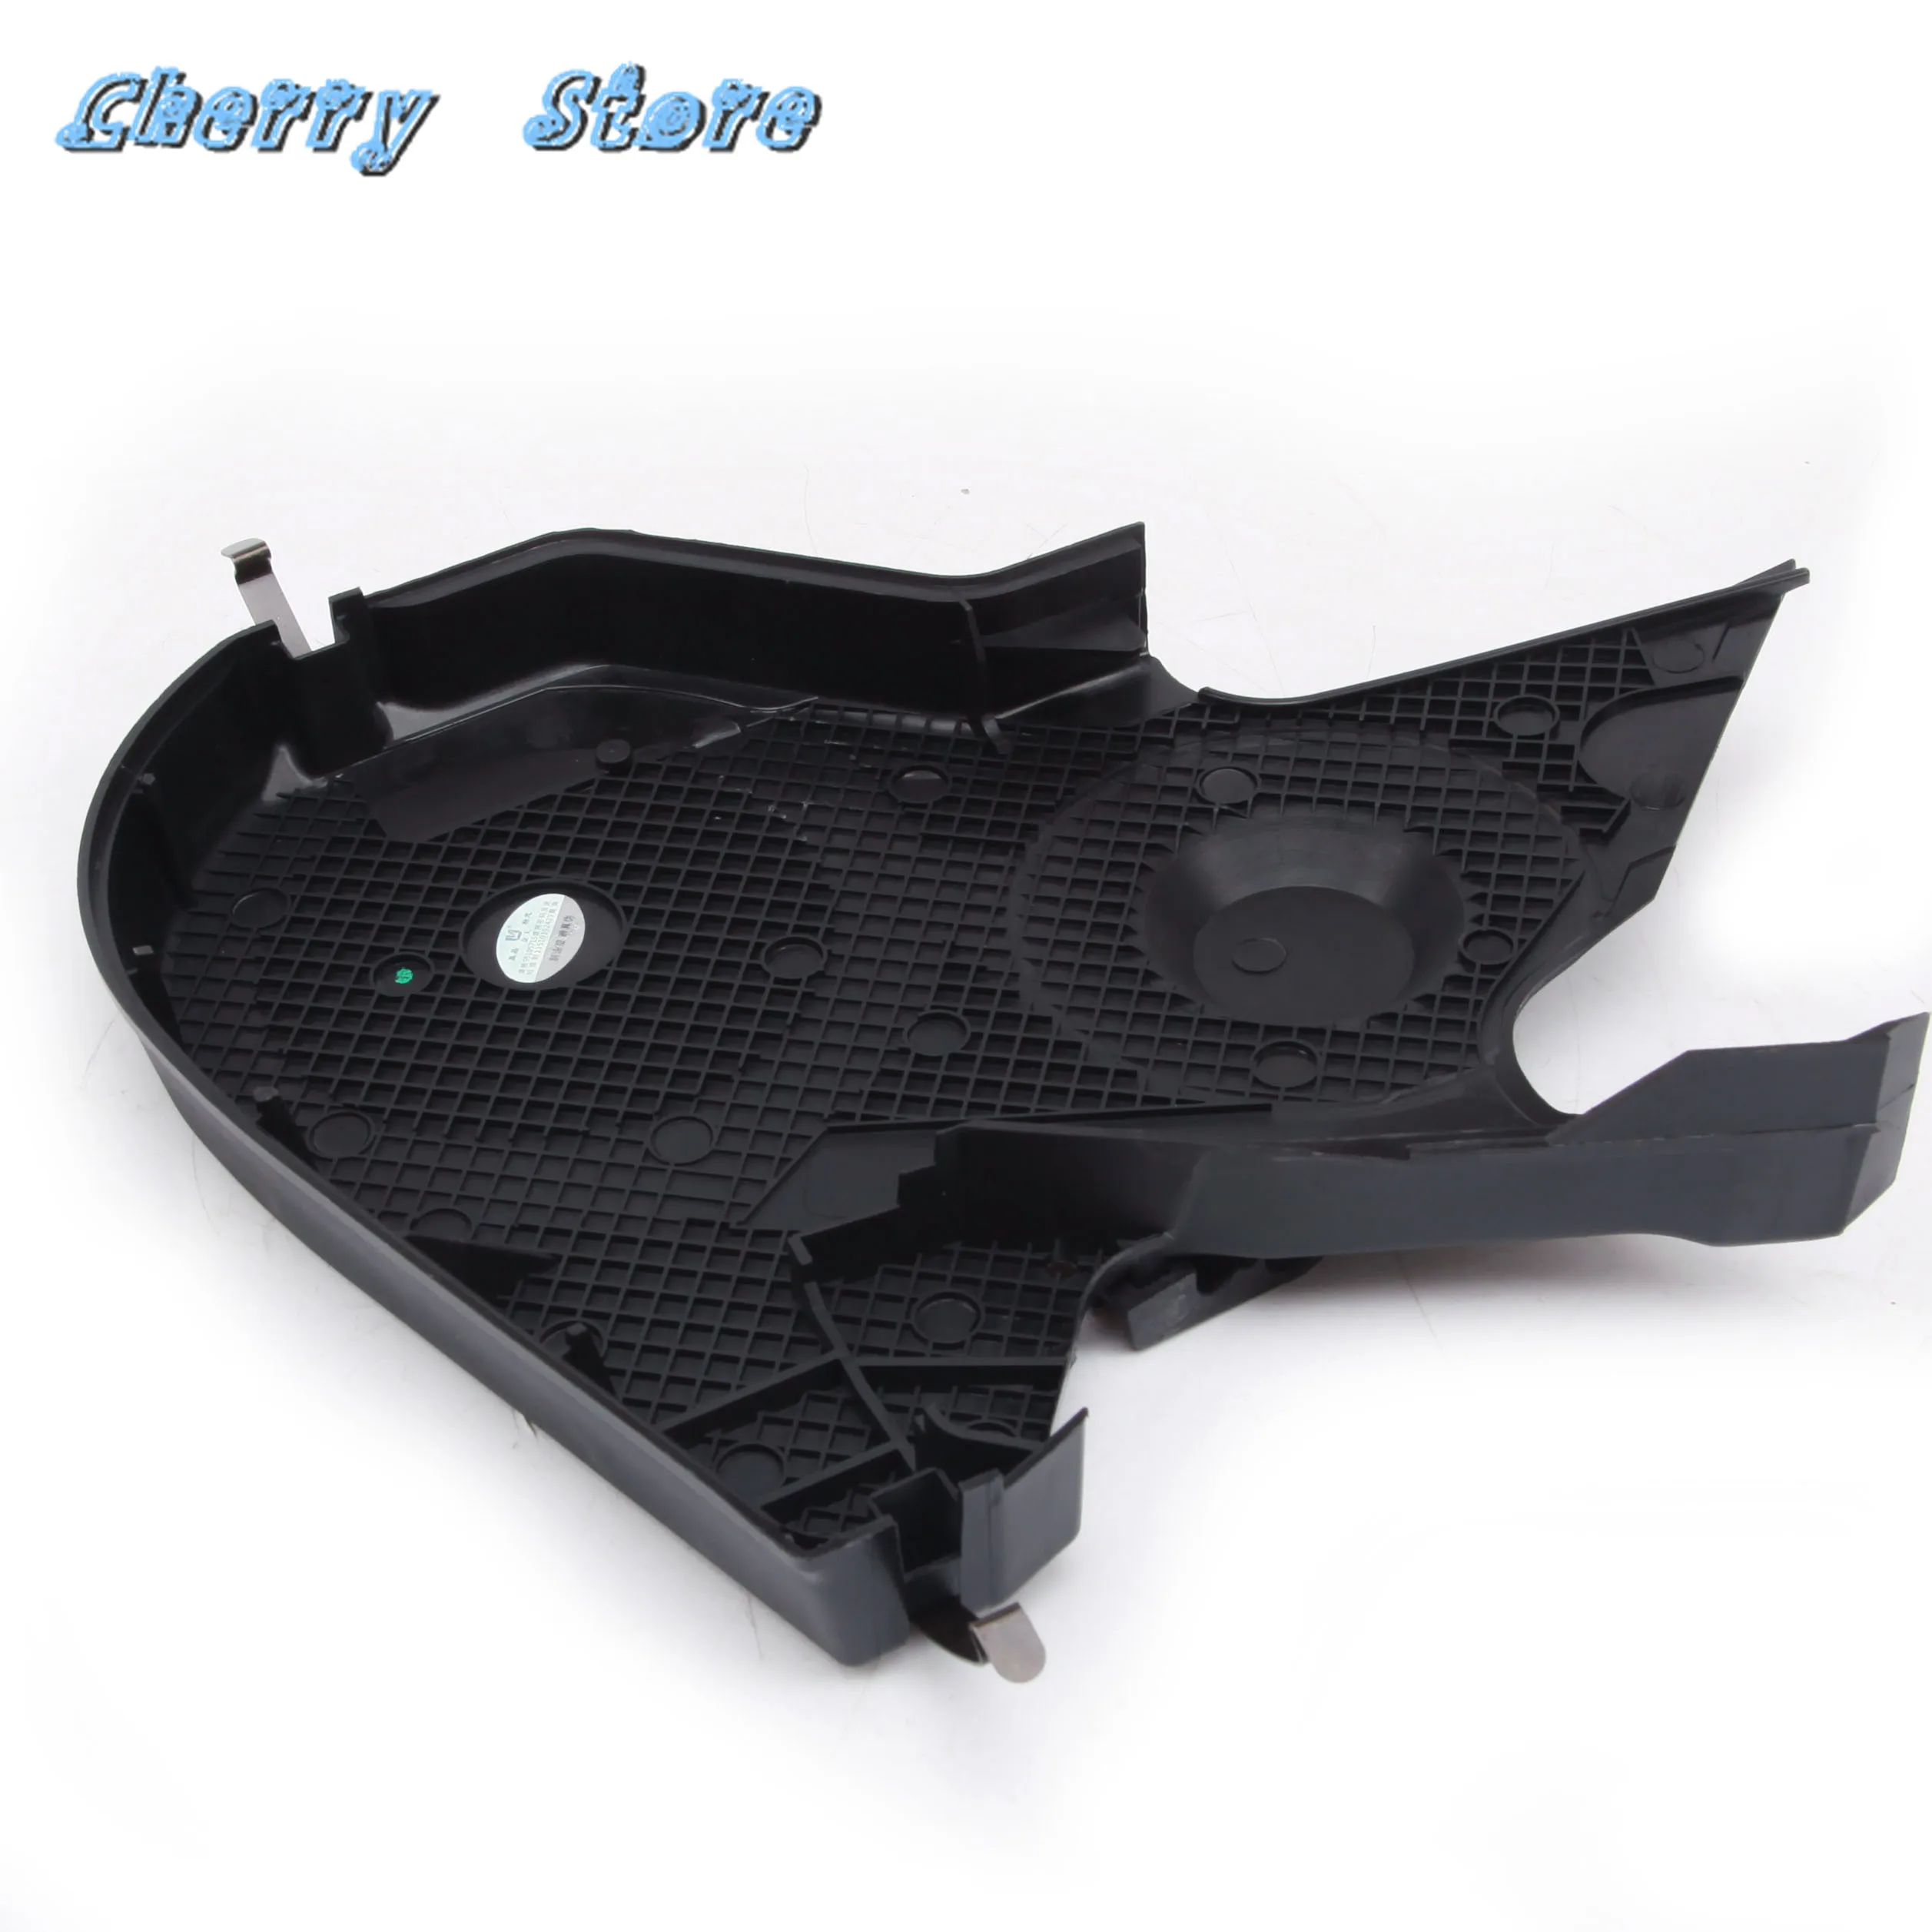 

New 06A 109 108 C Timing Belt Cover Toothed Belt Cover For Audi A3 A4 A6 TT VW Golf Seat Skoda 1.8L 06A 109 108 K 06A 109 108 E